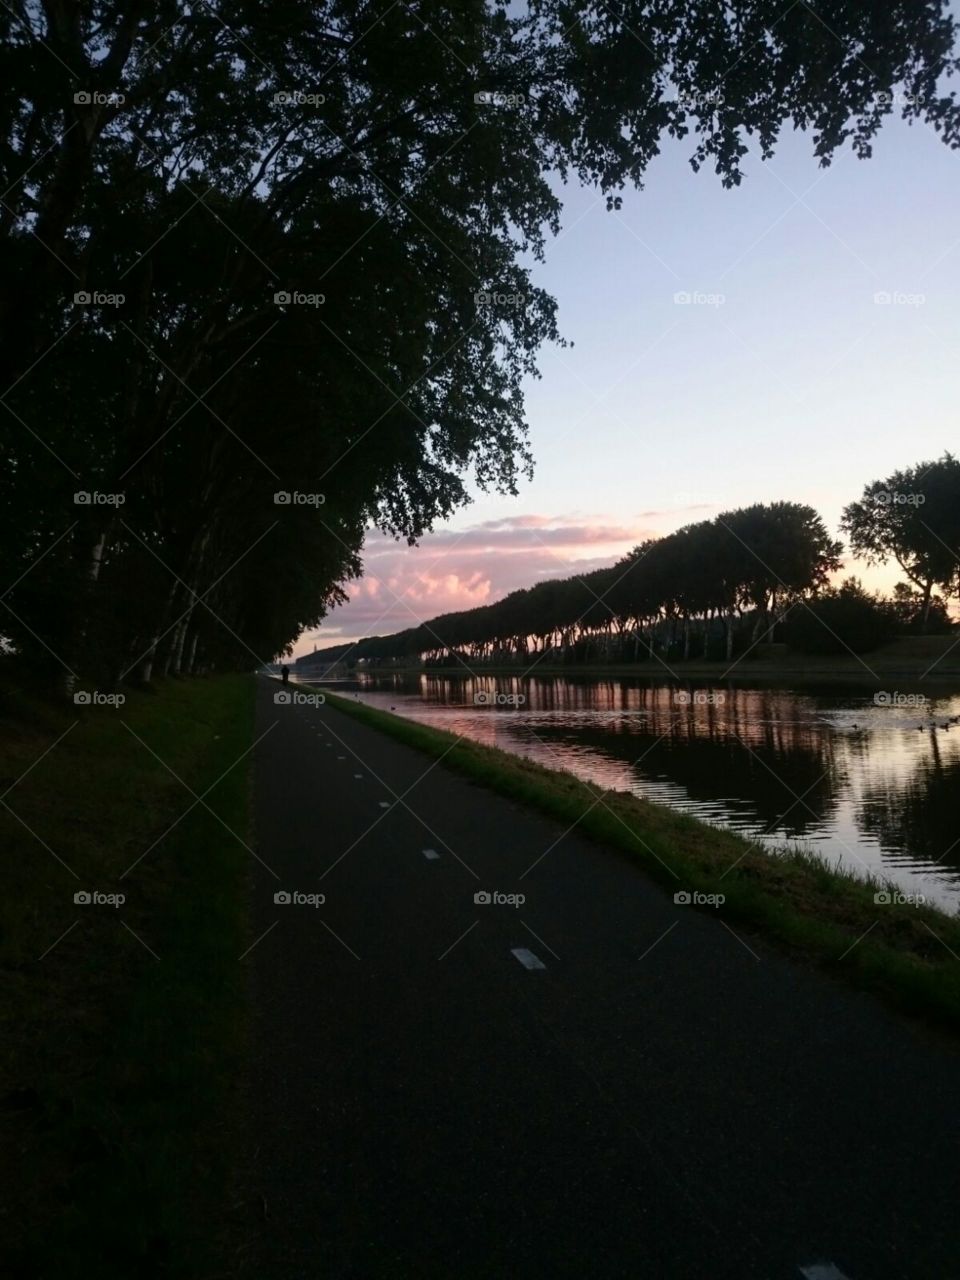 purper sky above canaĺ. fantastic sky above canal with trees om a row